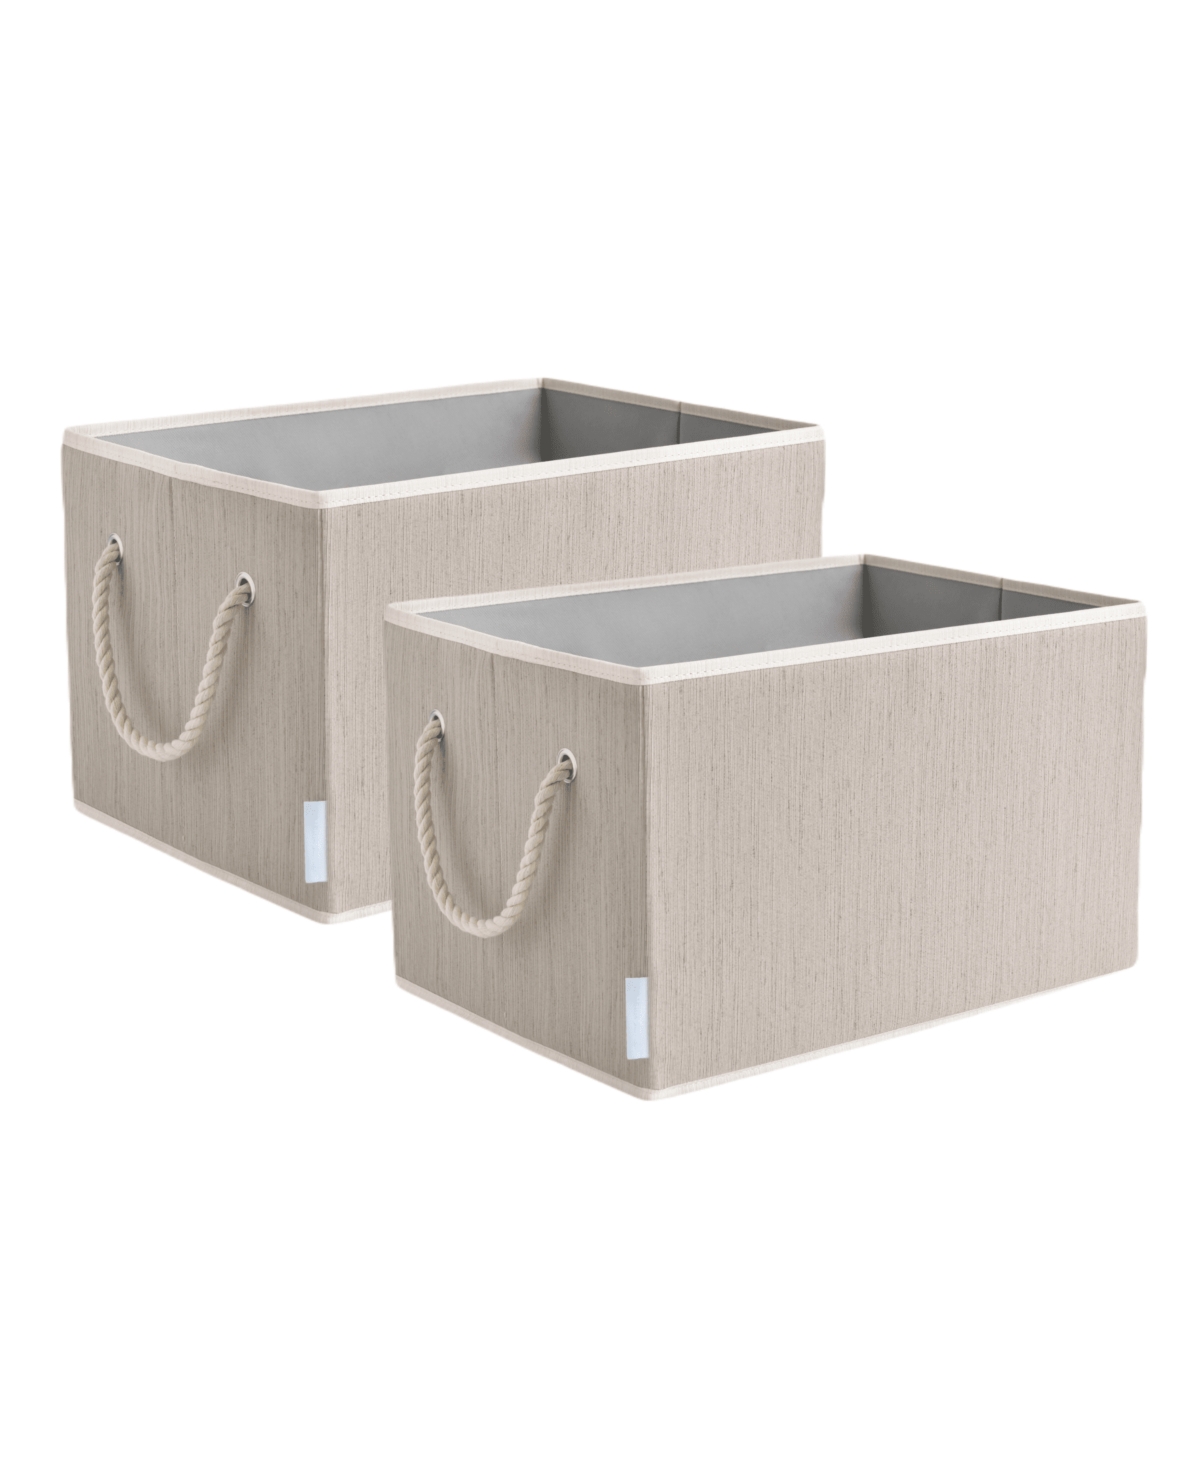 Wethinkstorage 34 Litre Collapsible Fabric Storage Bins With Cotton Rope Handles, Set Of 2 In Clay